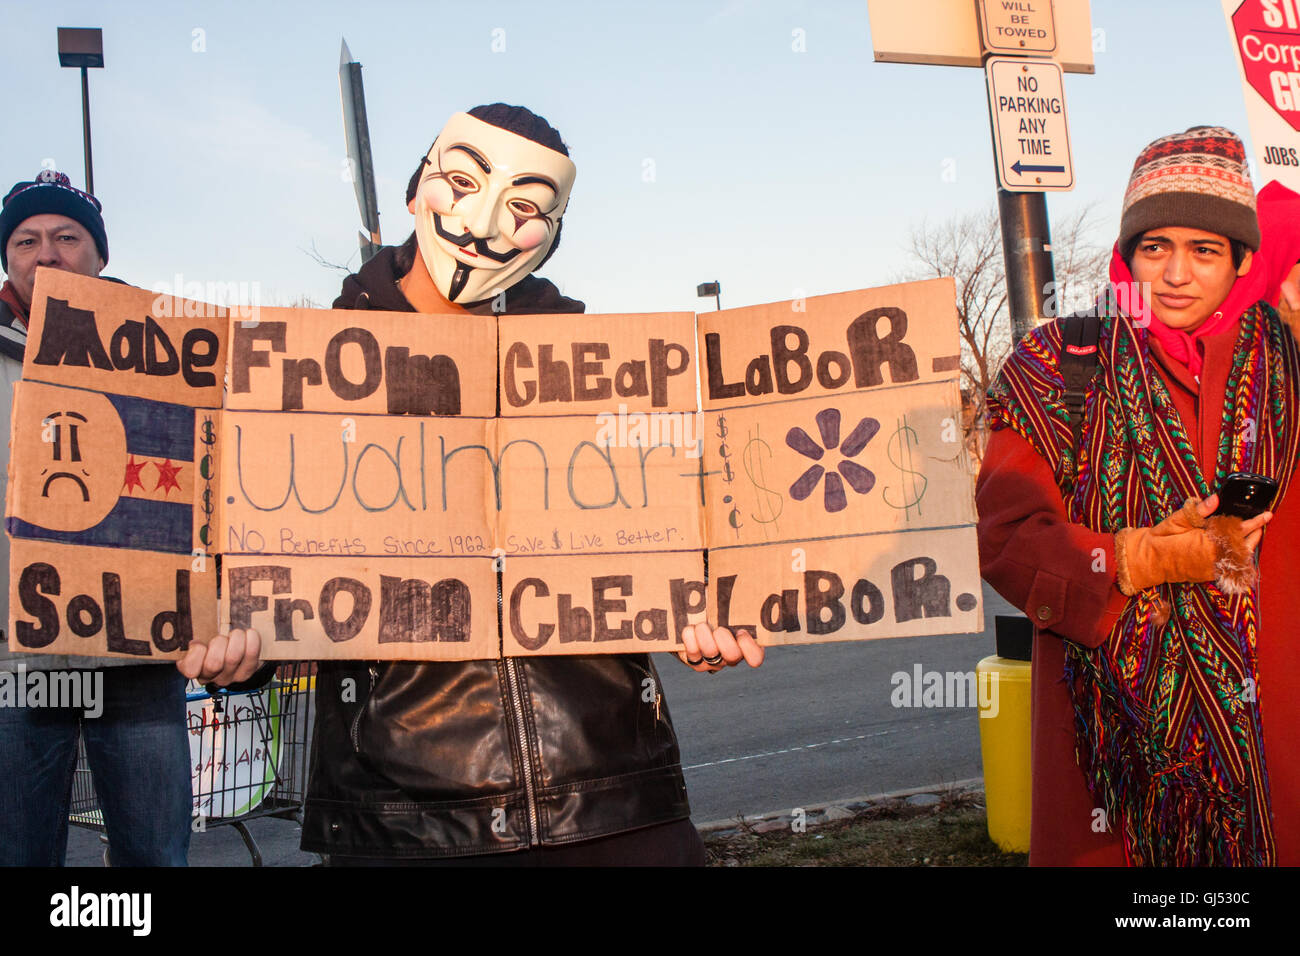 Chicago, Illinois - Nov. 29, 2013: Man wearing an anonymous mask protests outside a Walmart store in support of striking workers on Black Friday. Stock Photo